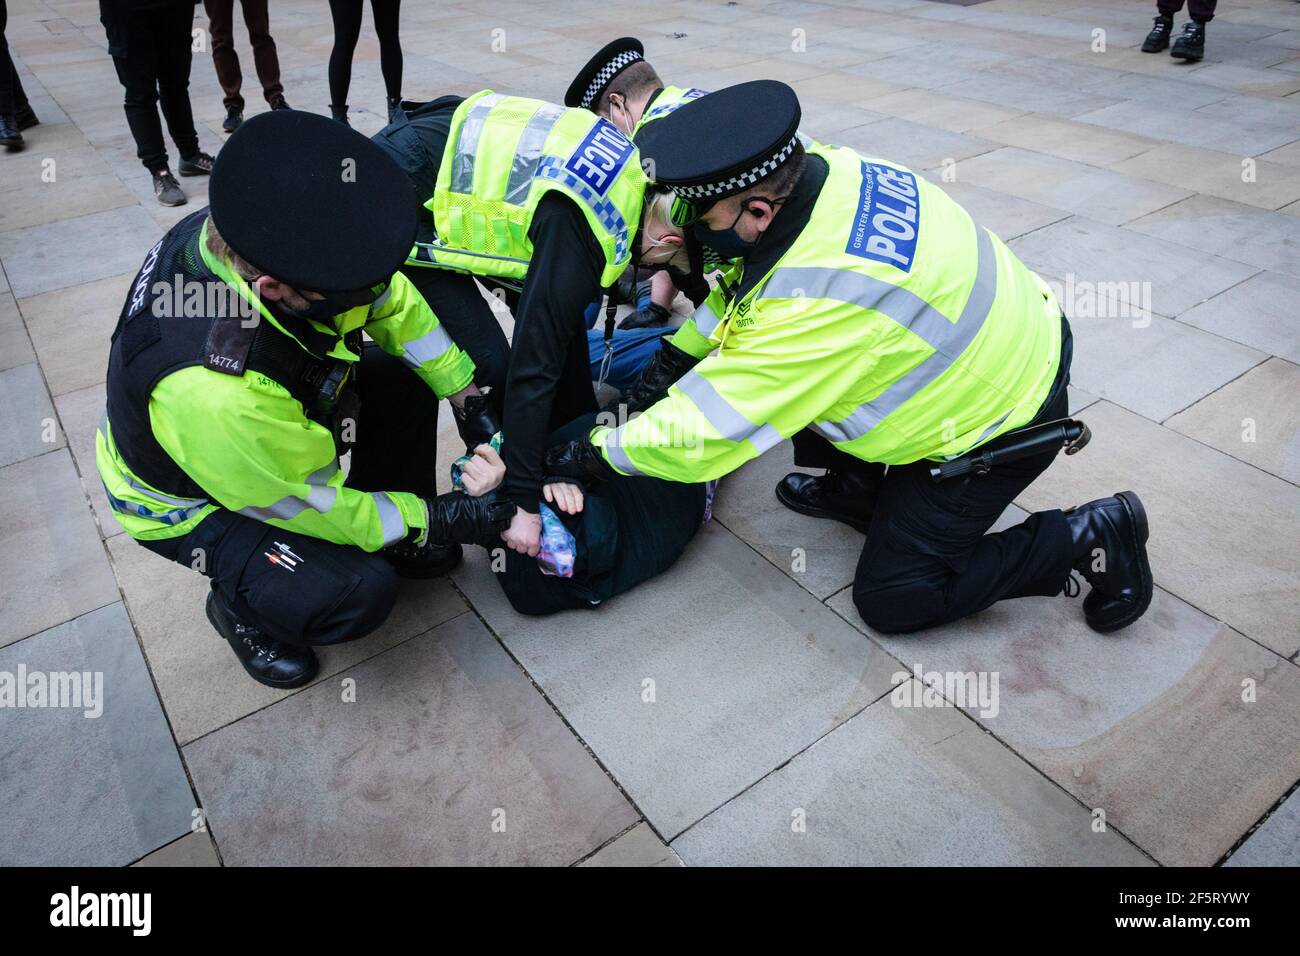 Manchester, UK. 27th Mar, 2021. A protester is being detained by police during the demonstration. People come out to the streets to protest against the new policing bill in a 'Kill The Bill demonstration'. The new legislation will give the police more powers to control protests. Credit: SOPA Images Limited/Alamy Live News Stock Photo